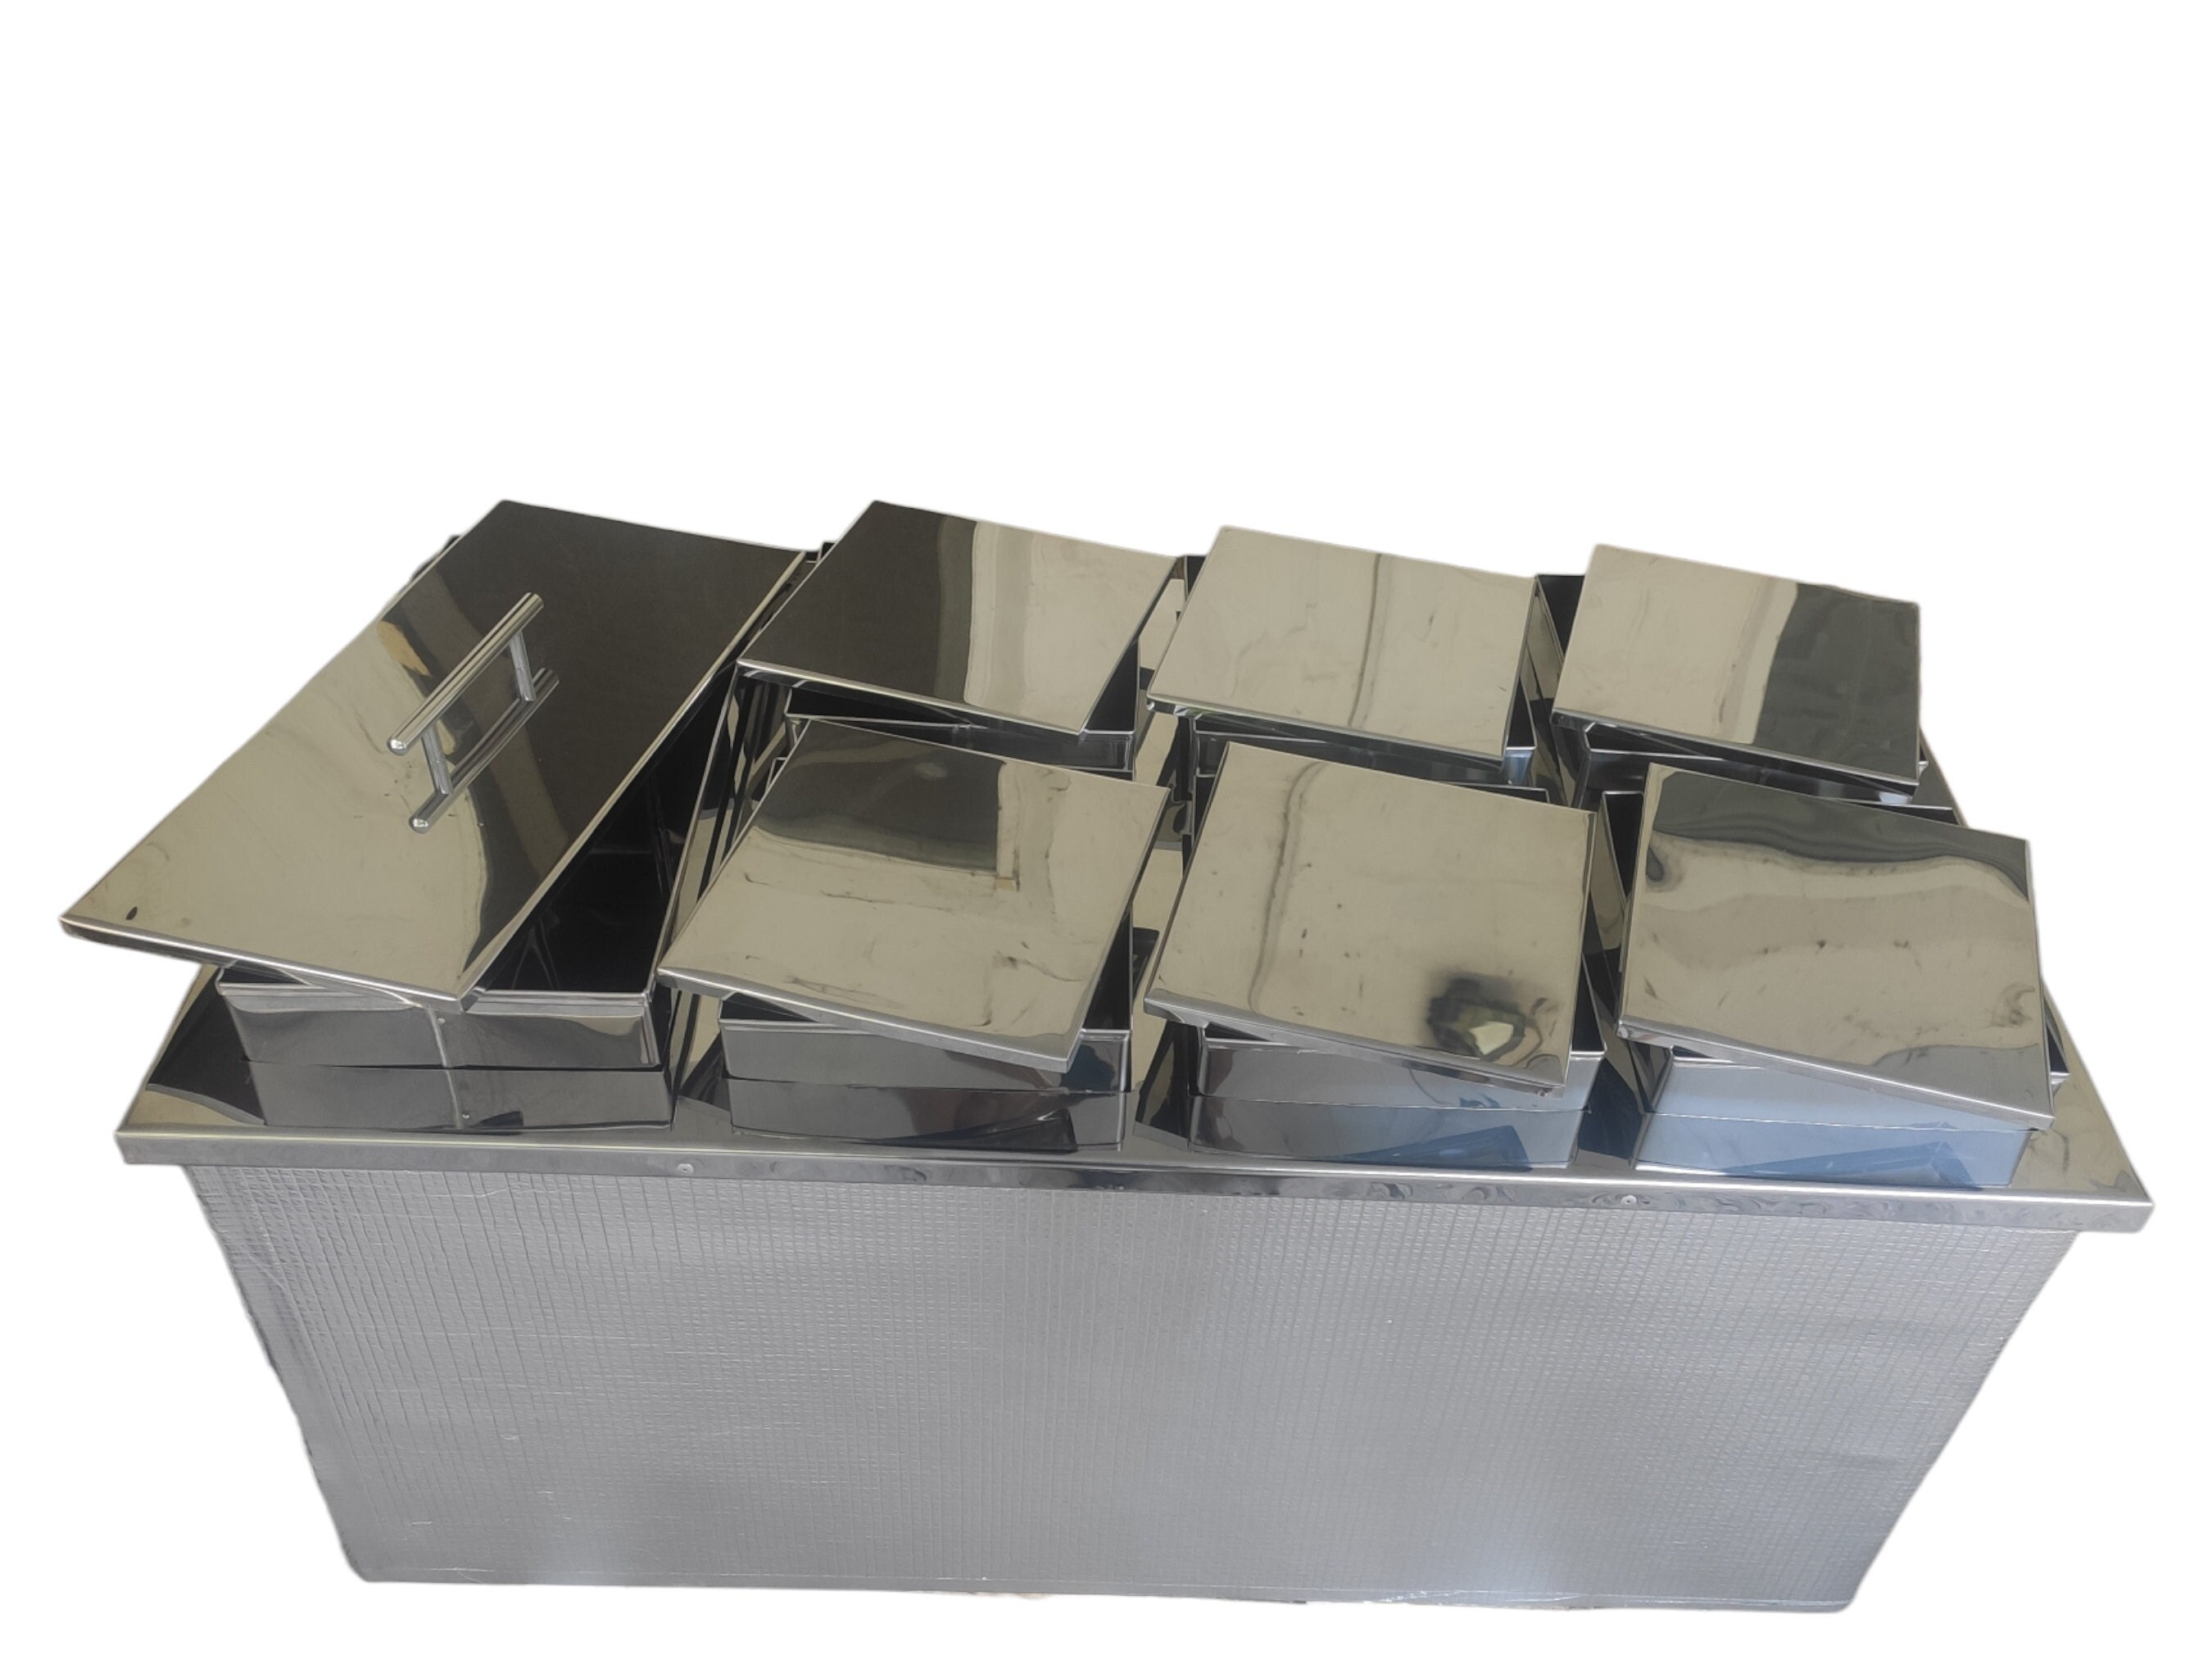 Stainless Steel Ice Cube Tray - Eco Carmel